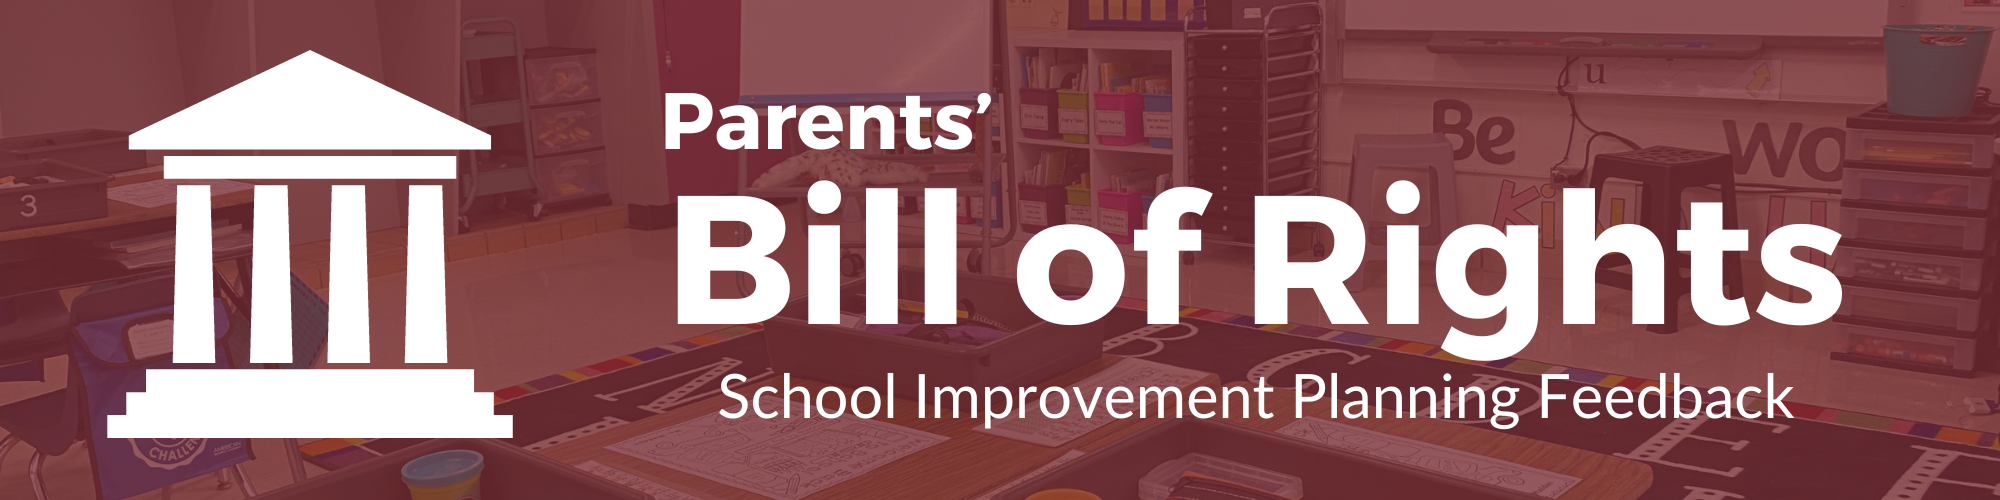 Parents' Bill of Rights School Improvement Planning Feedback text on burgundy color background with faded photograph of a classroom